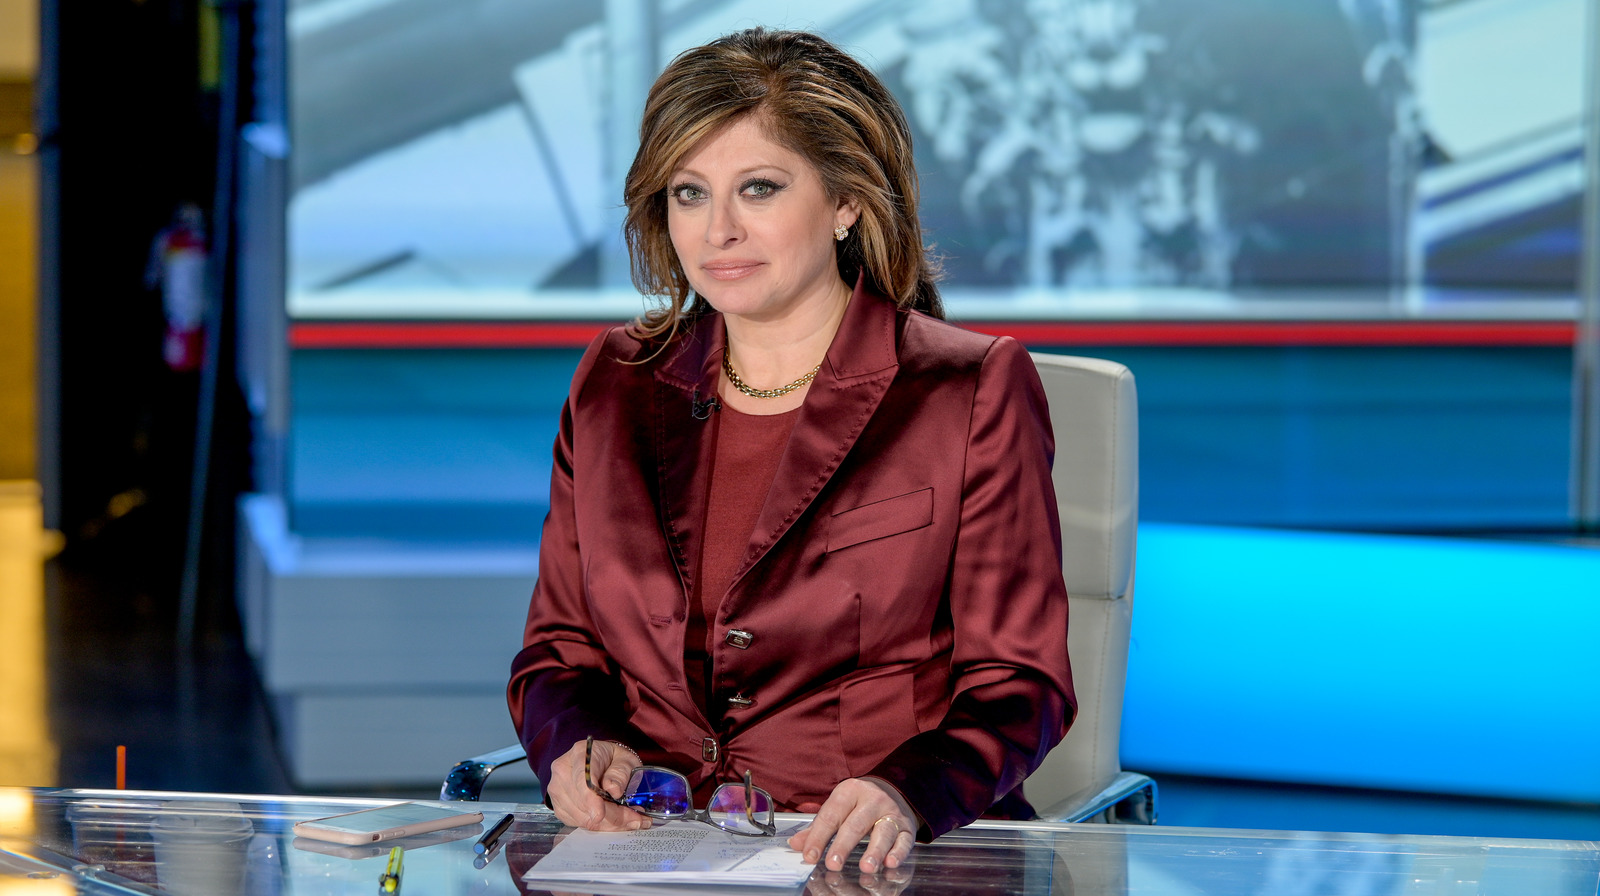 Maria Bartiromo is recognized by viewers of the Fox Business Network for ho...